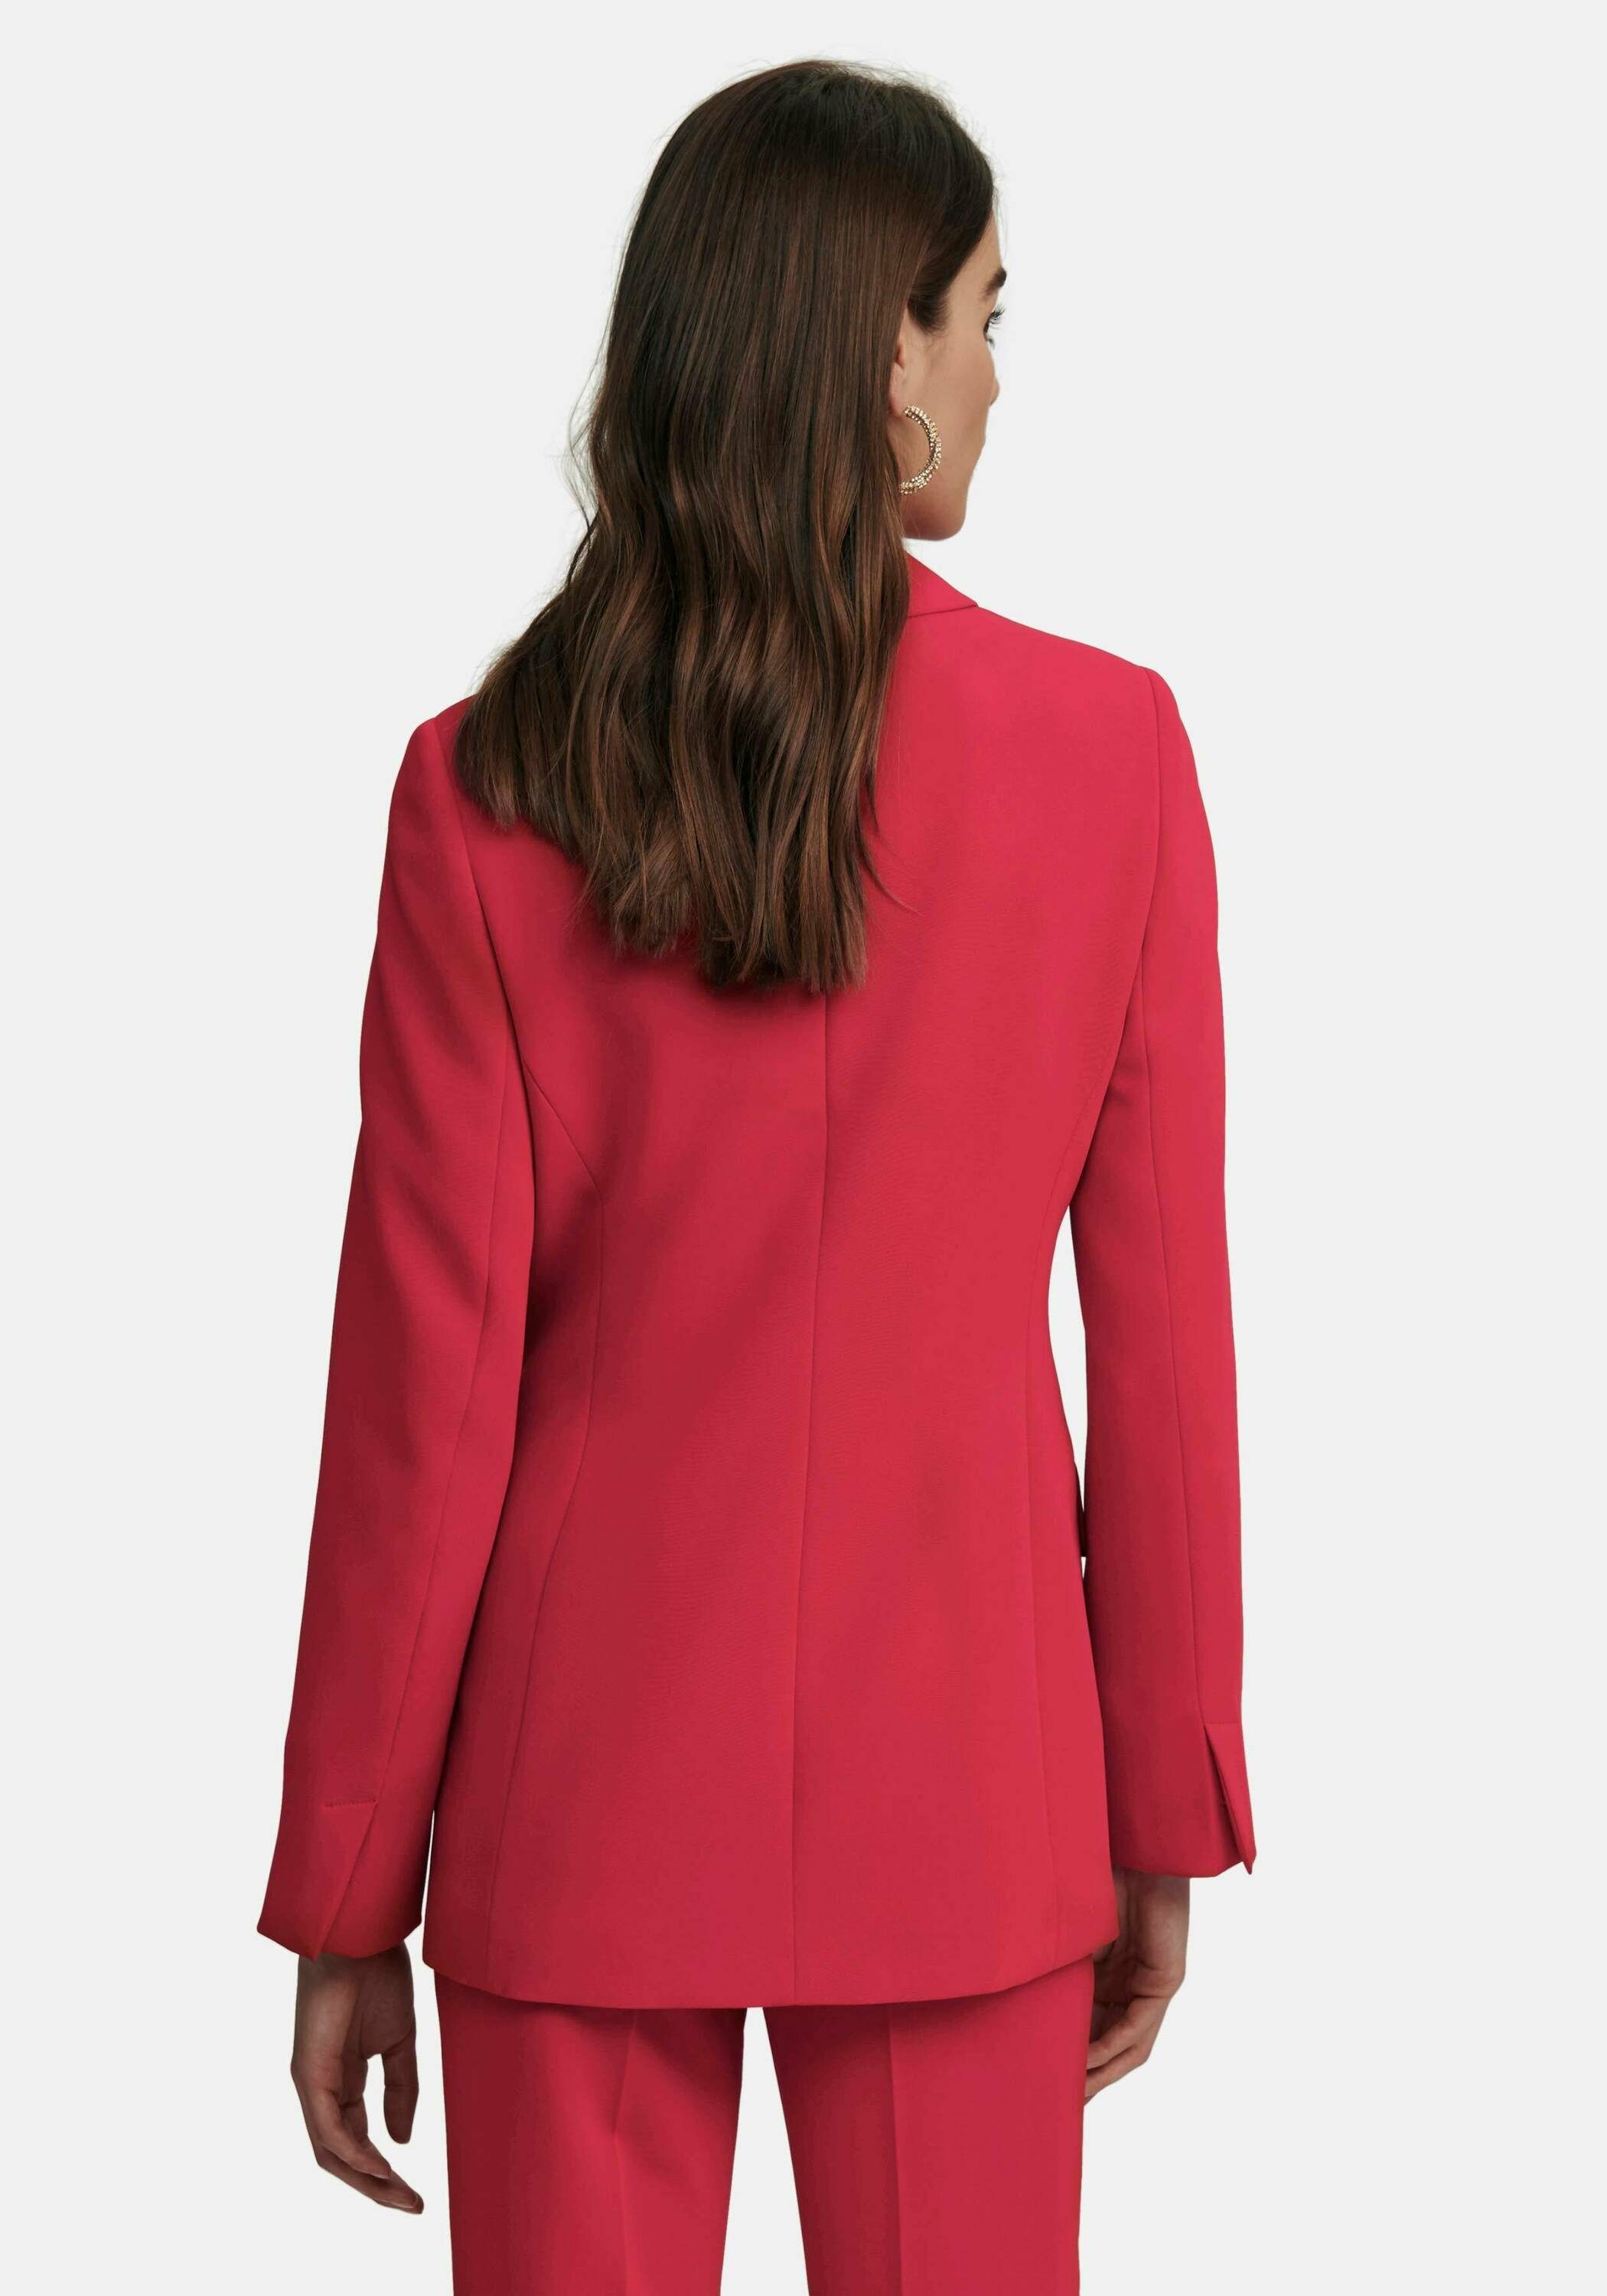 Laura Biagiotti Roma buttons Jackenblazer blazer mother-of-pearl with CHERRY Long